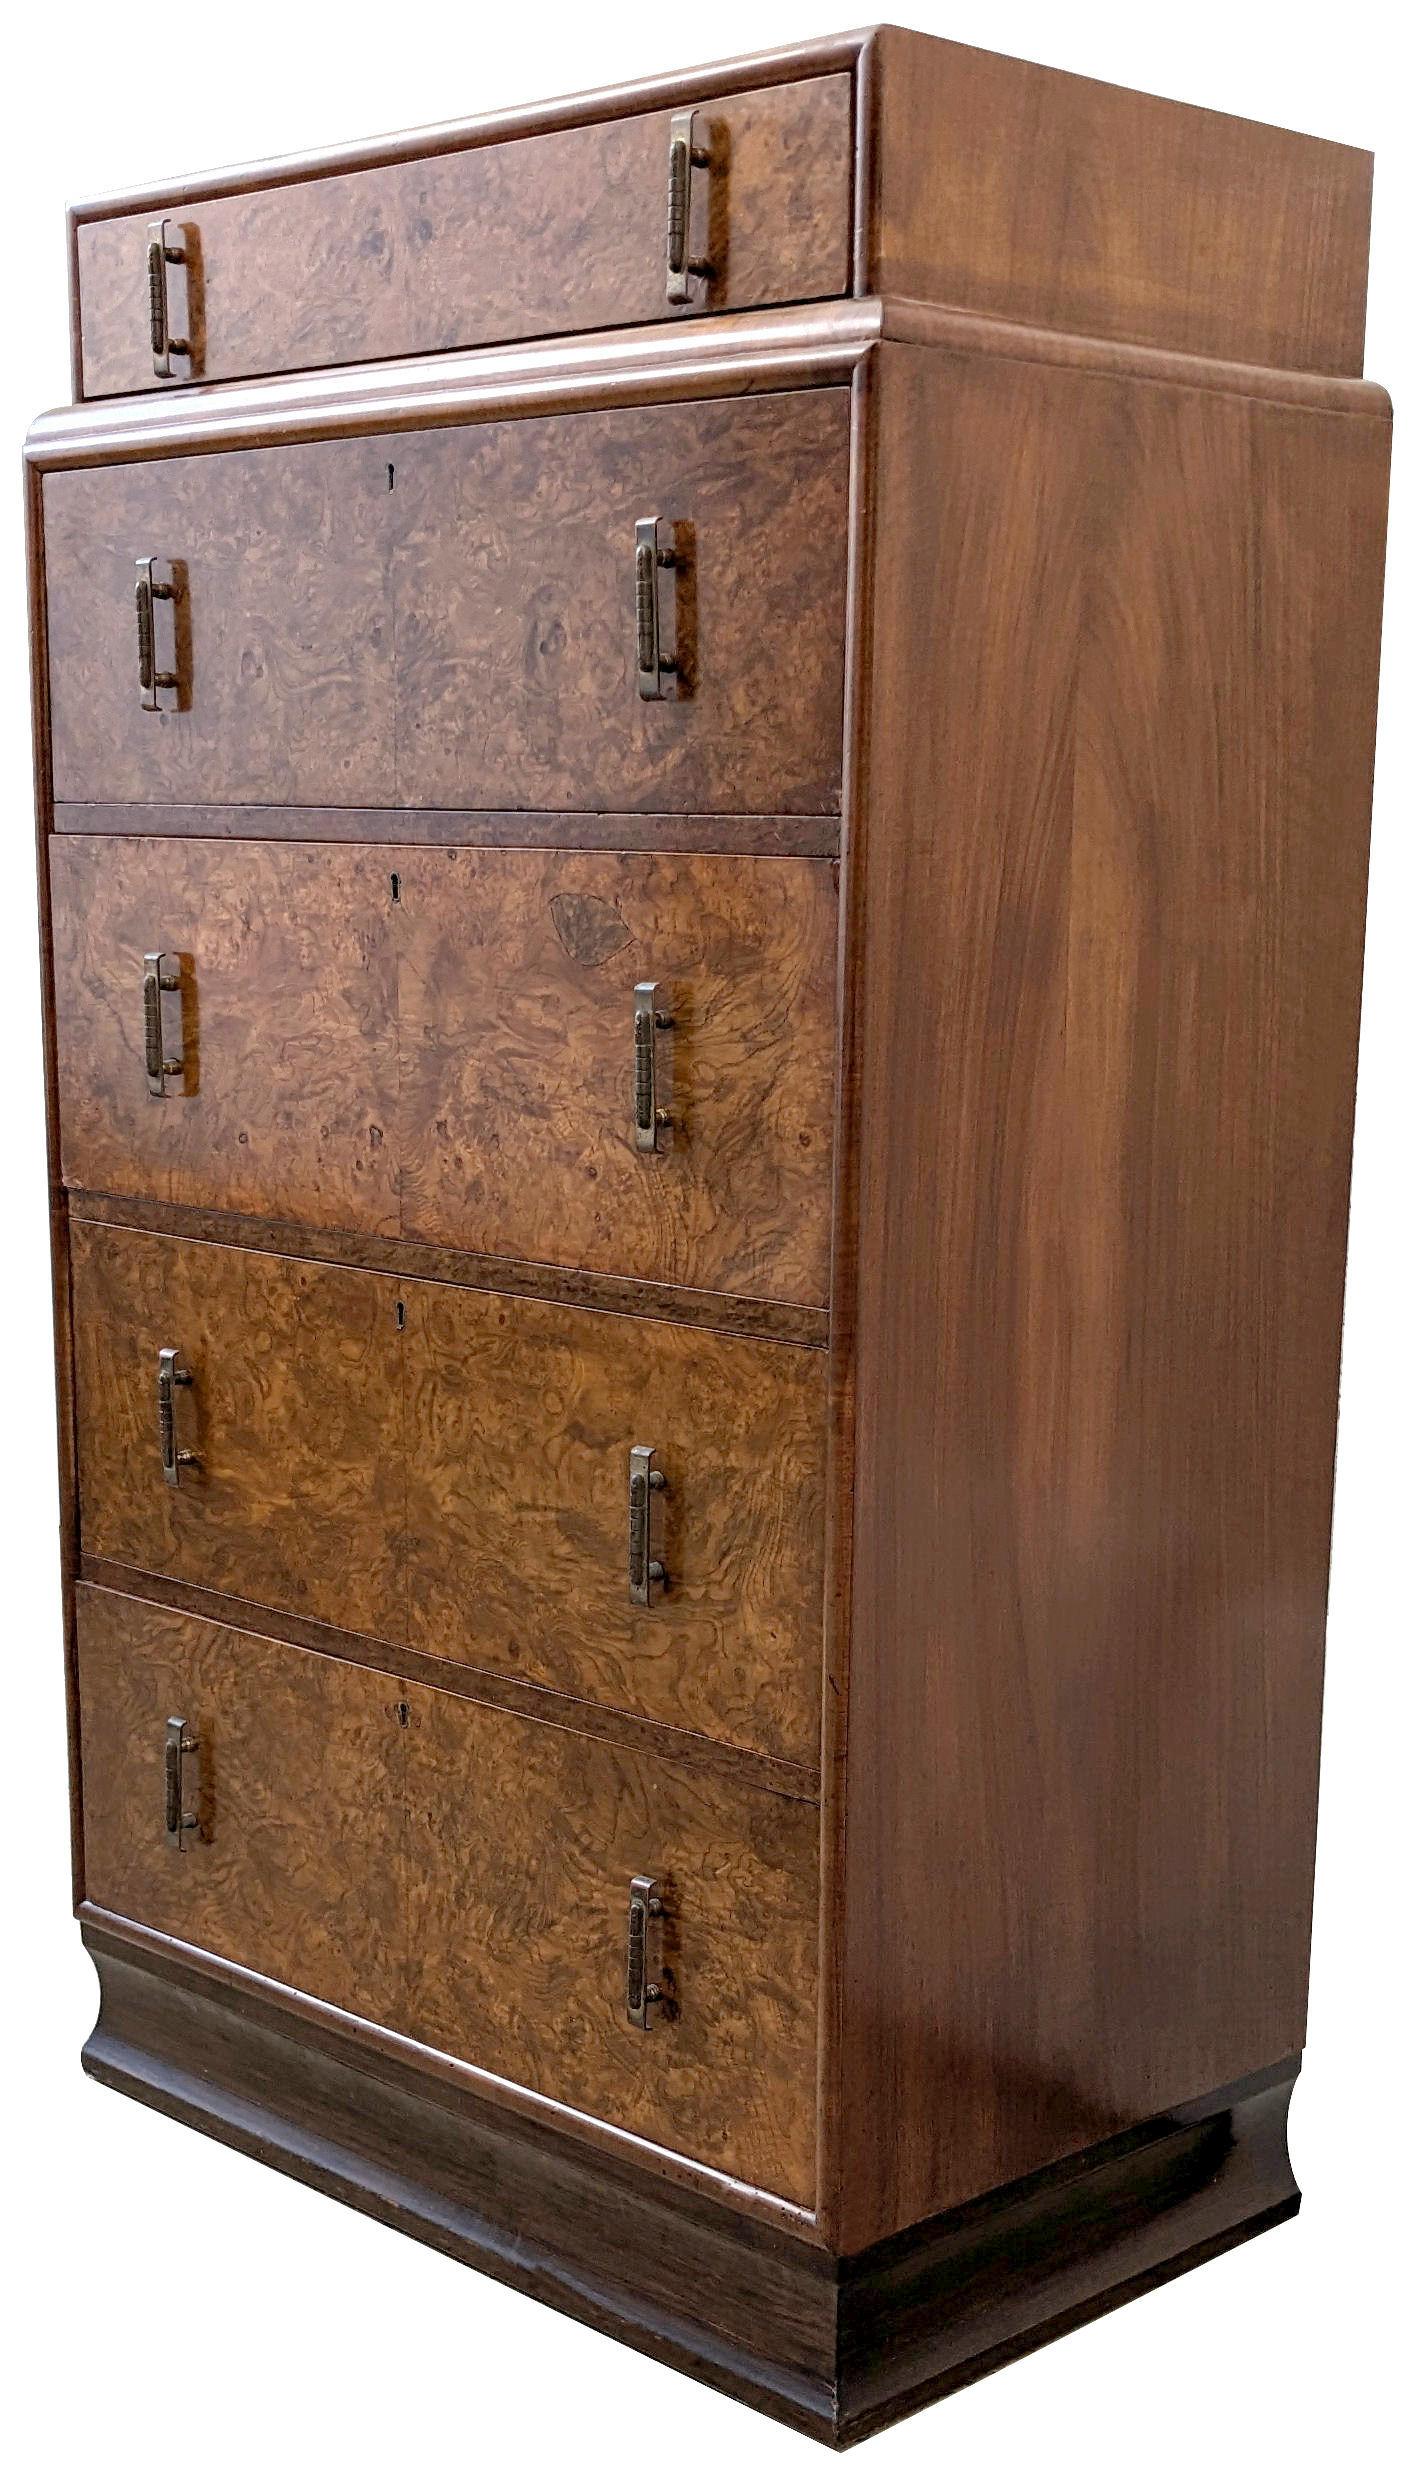 For your consideration is this very stylish and beautifully figured Walnut original Art Deco chest of drawers which dates to the 1930's. Five generously sized drawers which are veneered in mid tone figured walnut veneer with original brass bar